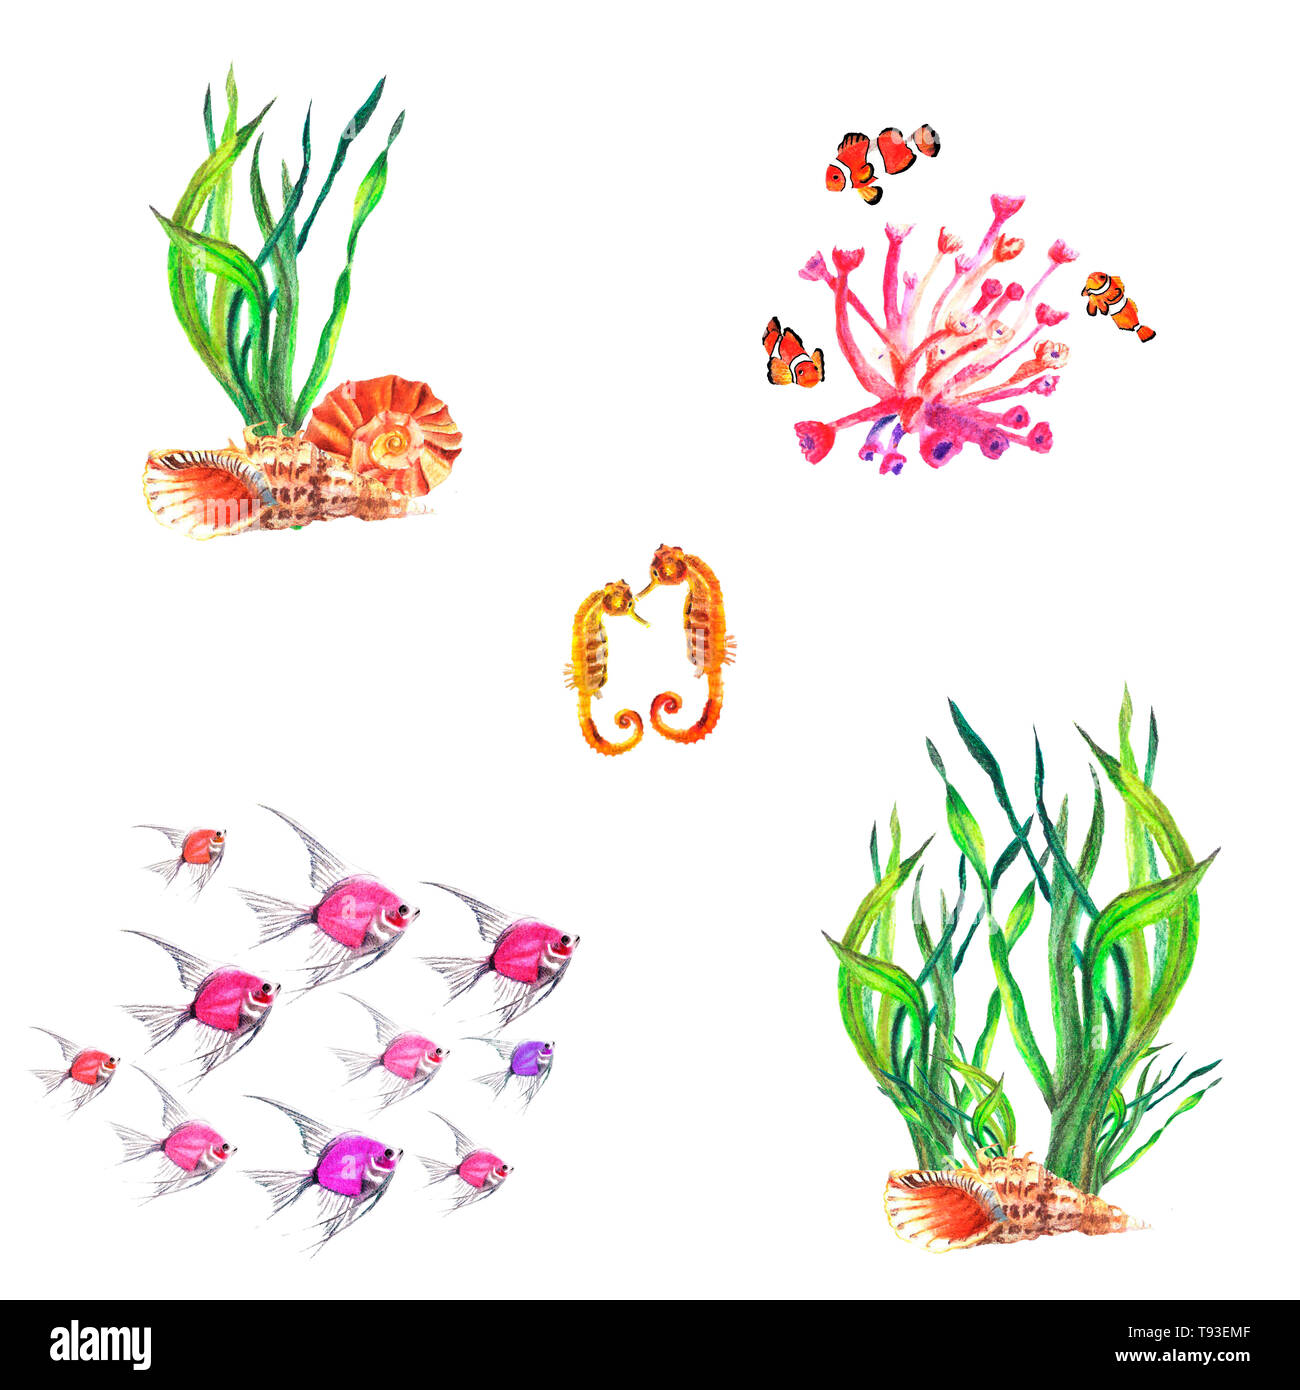 Watercolor hand painted compositions of water-plants, corals, Amphiprion percula, Hippocampus,  Ambassis, shells. Stock Photo